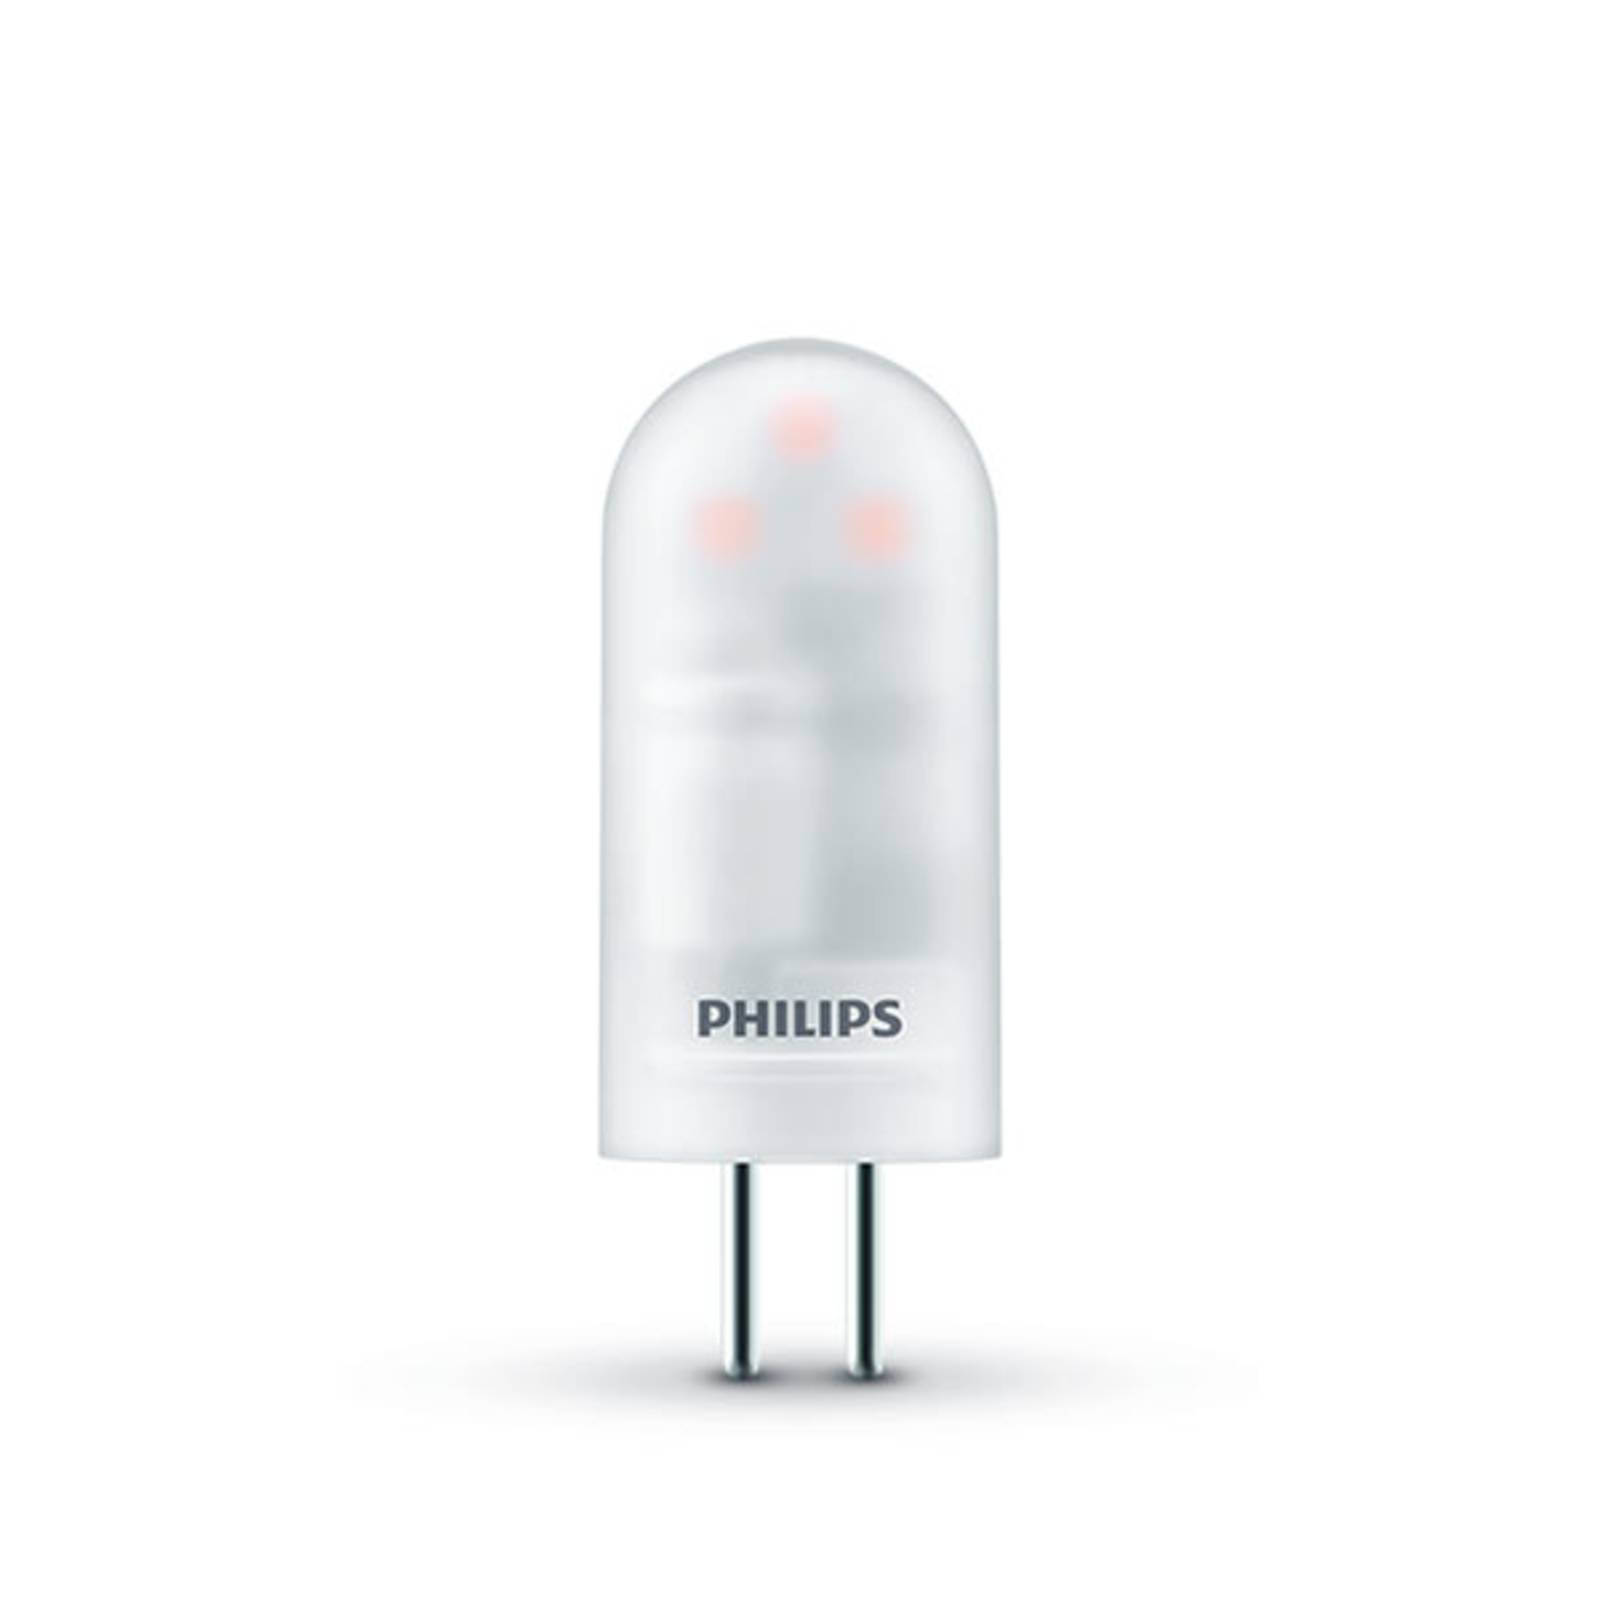 Image of Philips LED bispina G4 1,8 W 827